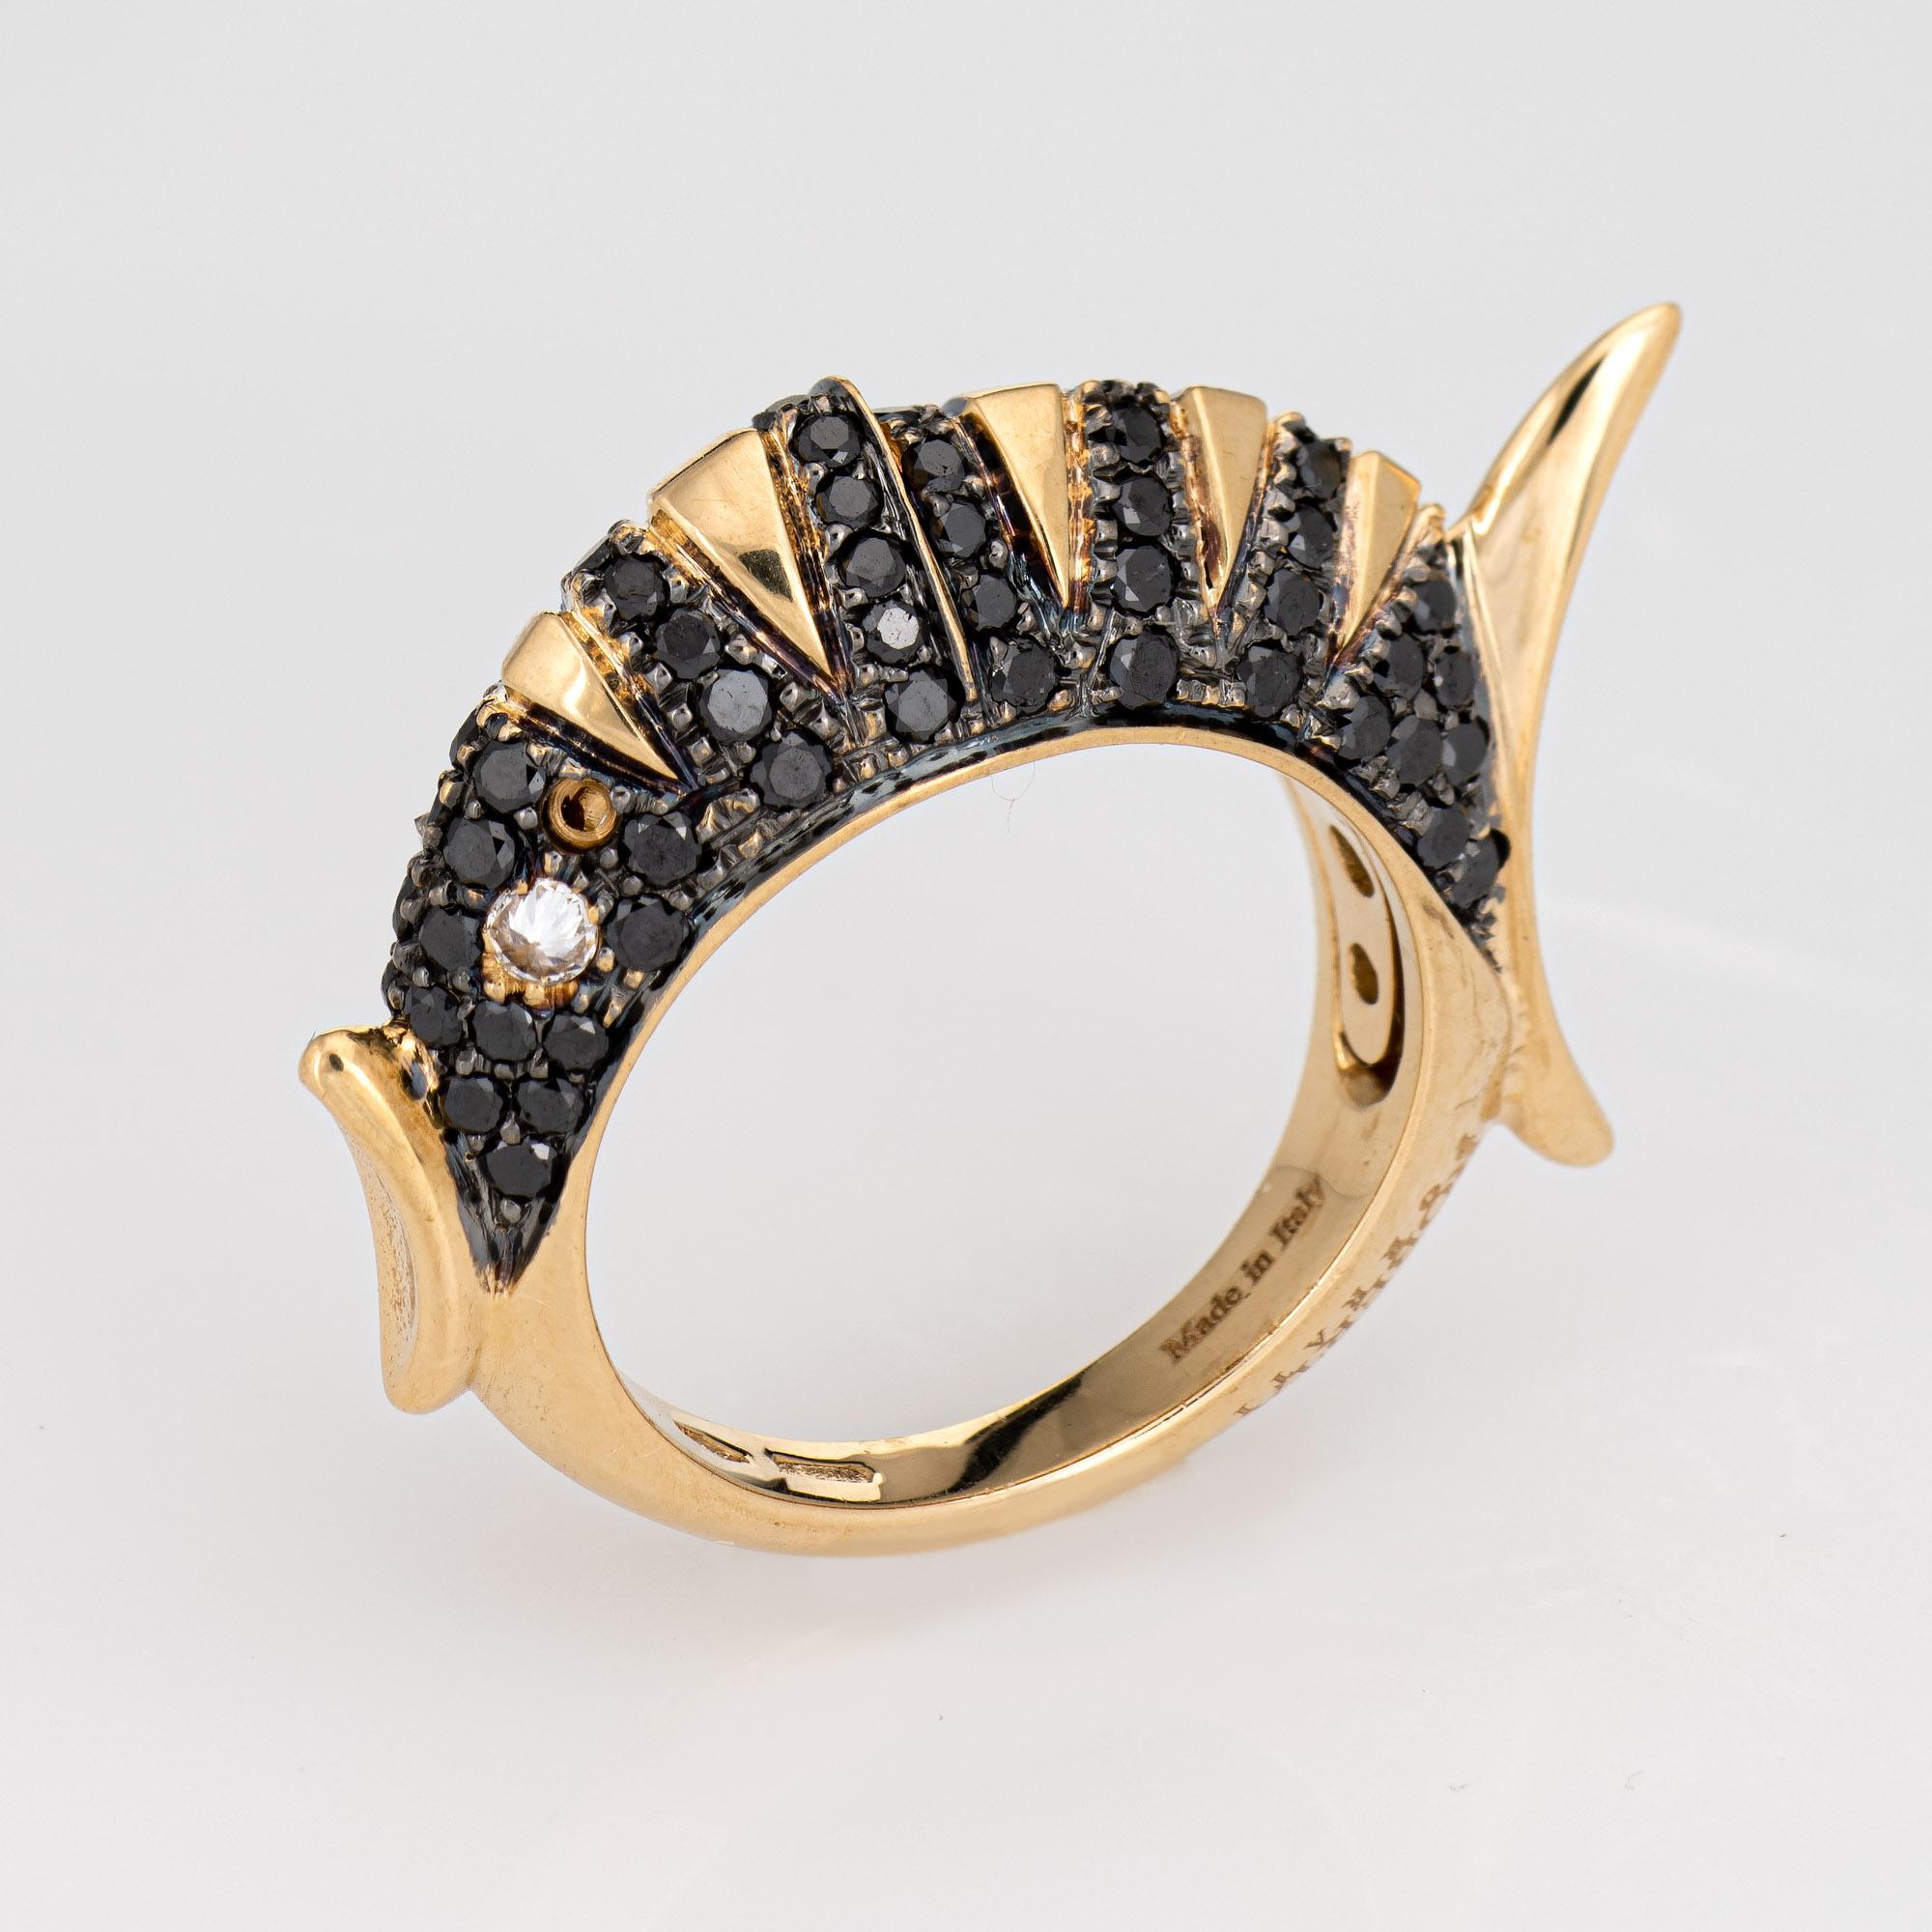 
Stylish Roberta Porrati fish ring crafted in 18 karat yellow gold. 

Black diamonds total an estimated 1 carat. Two white diamonds are set into the eyes (inverted) and total an estimated 0.20 carats.  

The distinct fish ring is set with black